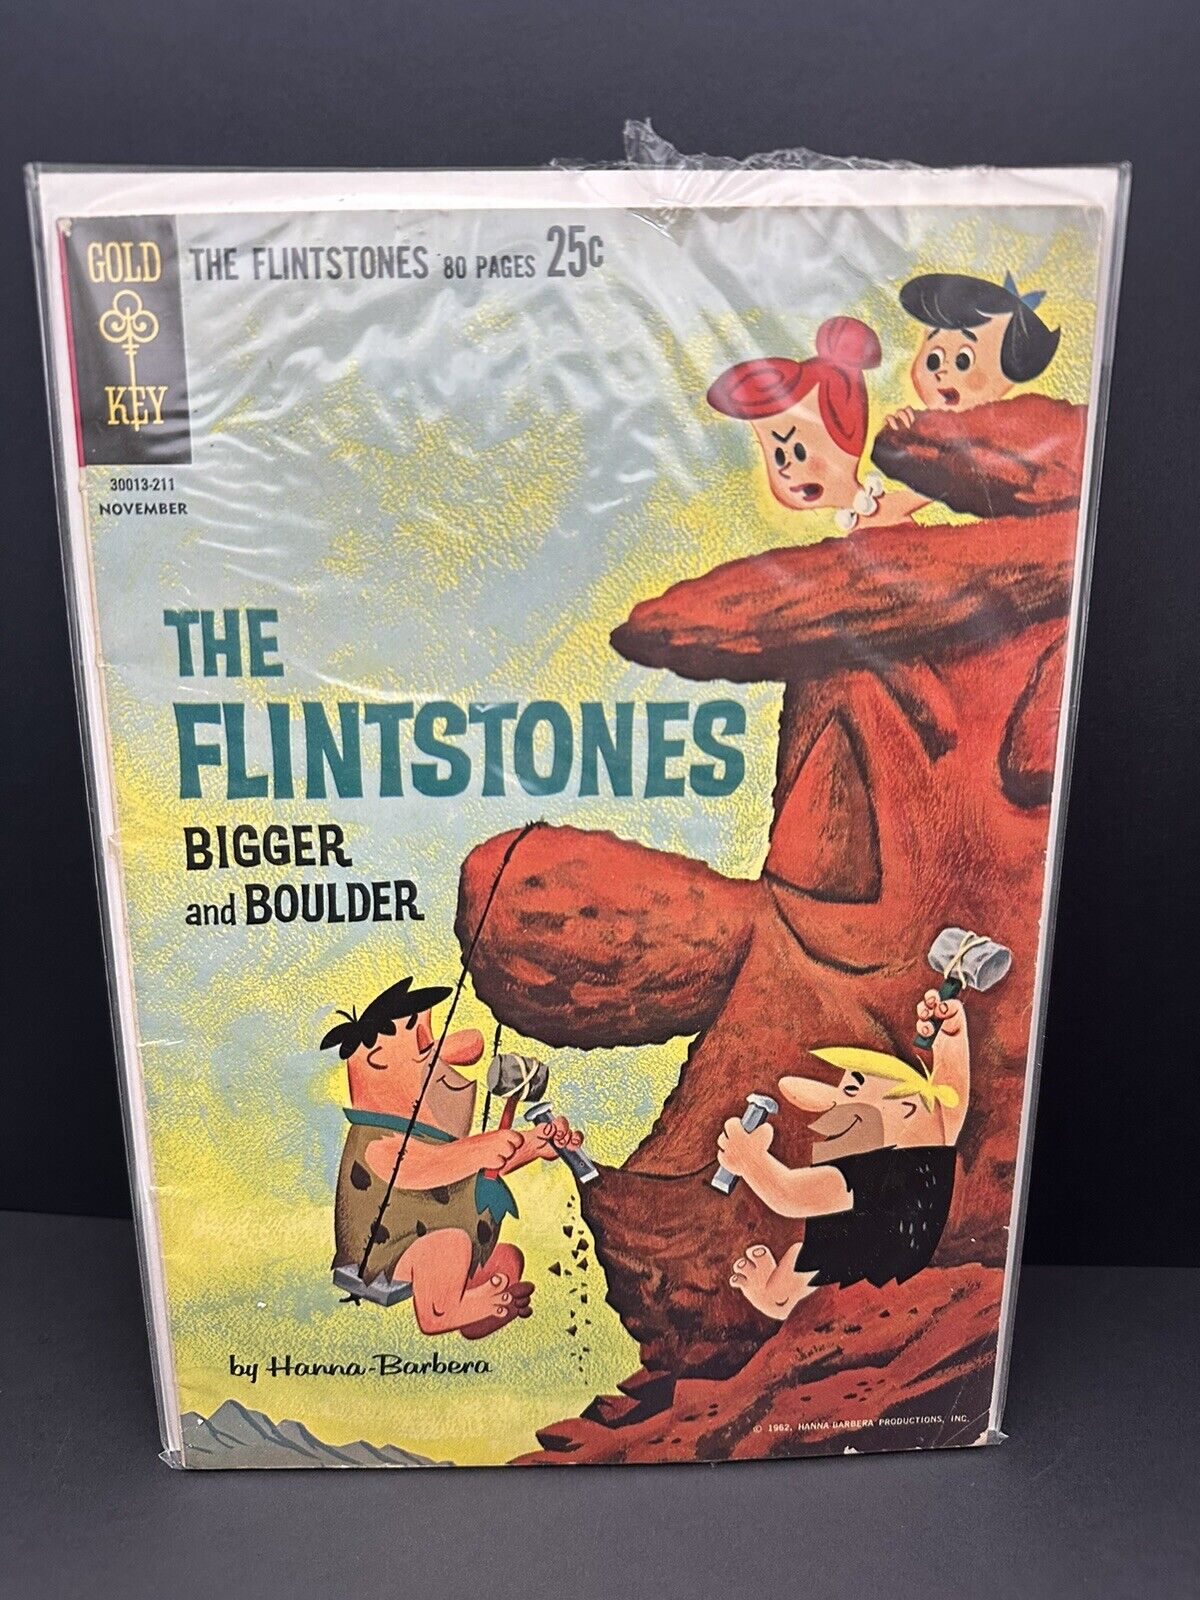 THE FLINTSTONES Bigger and Boulder #1 in FN- a Gold Key 1962 BOTH RELEASES X2